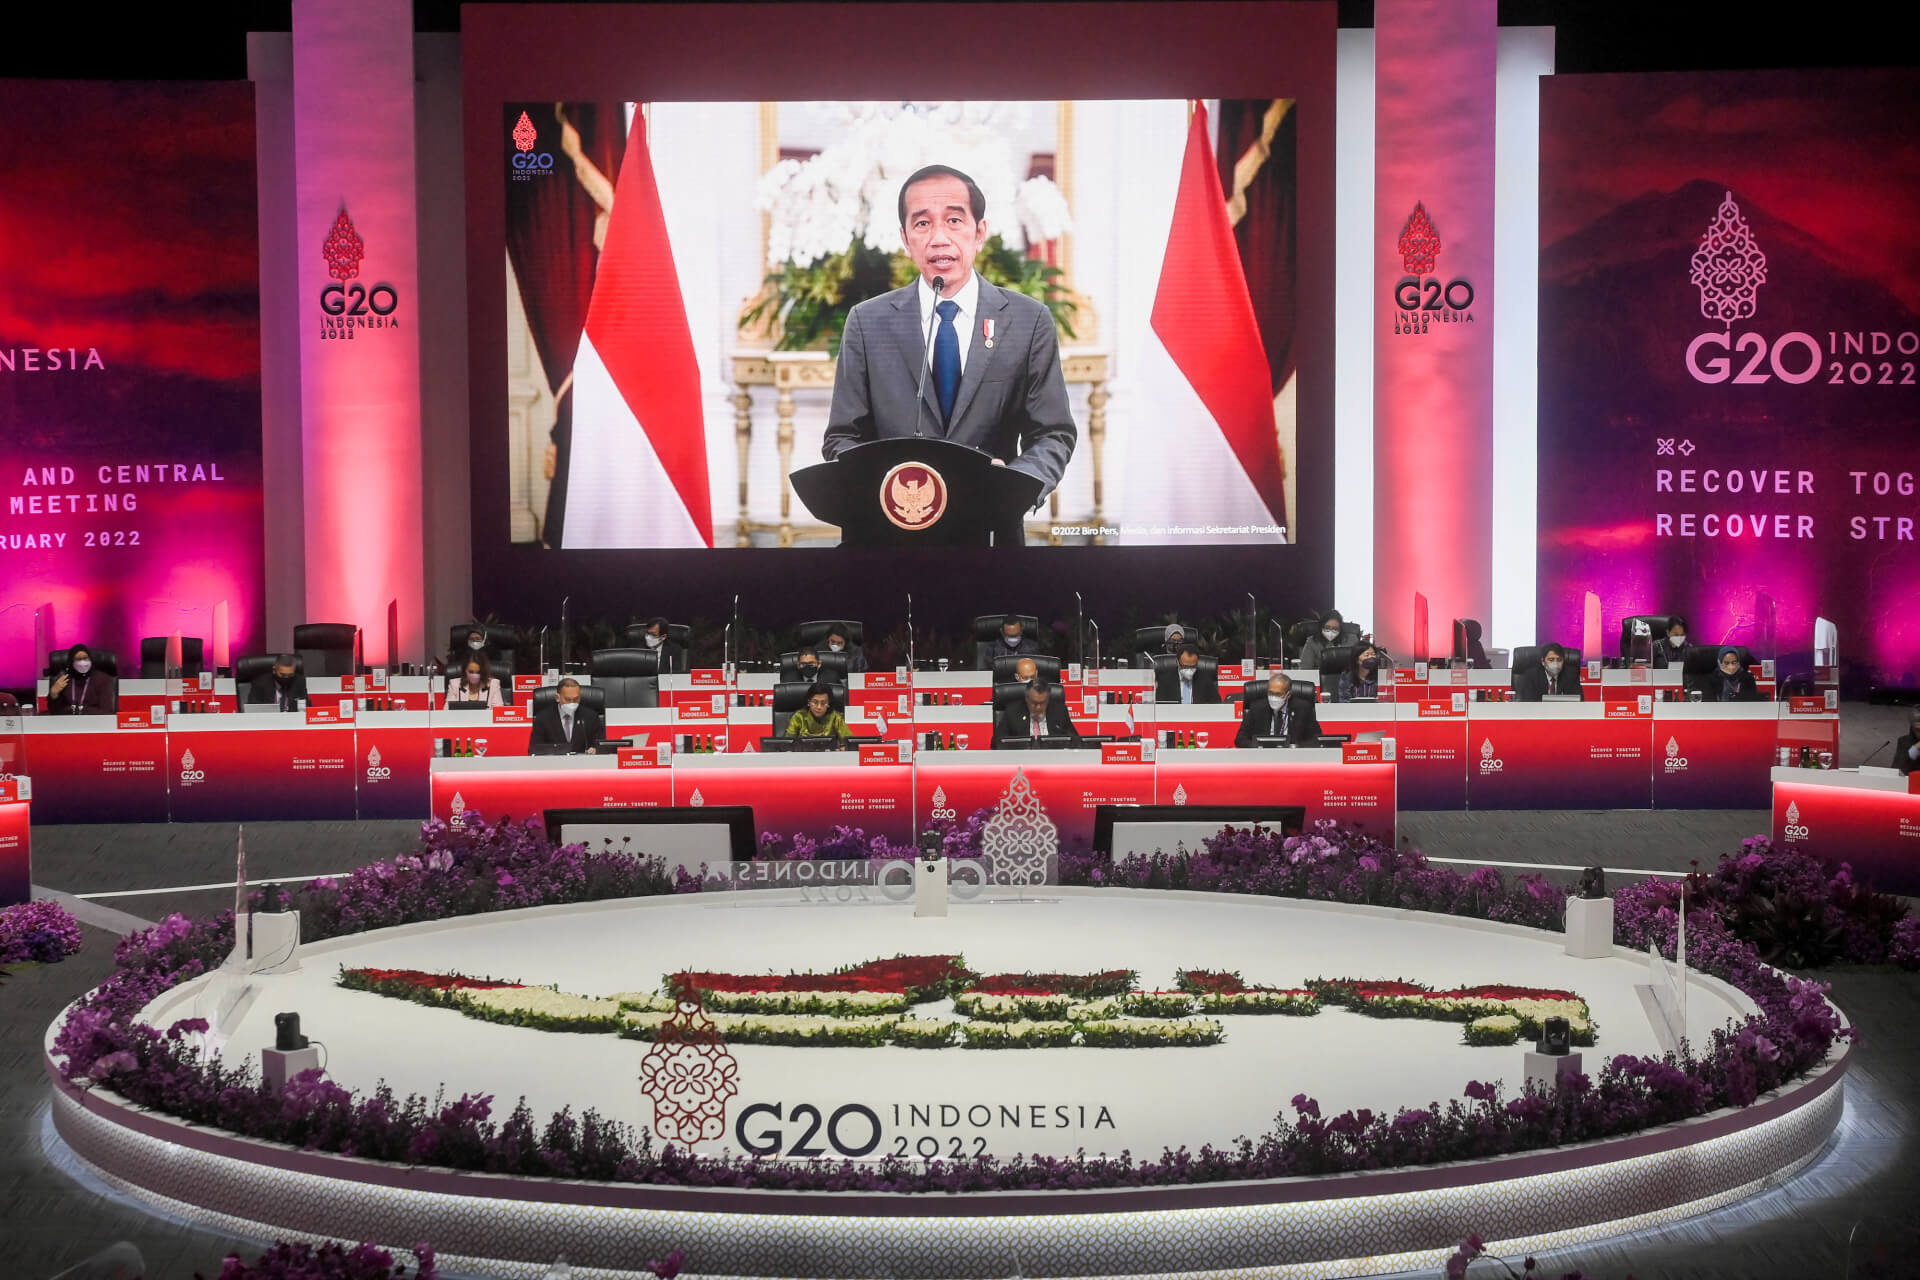 Indonesia Confirms Russia’s Attendance at Upcoming G20 Summit Despite Western Pressure